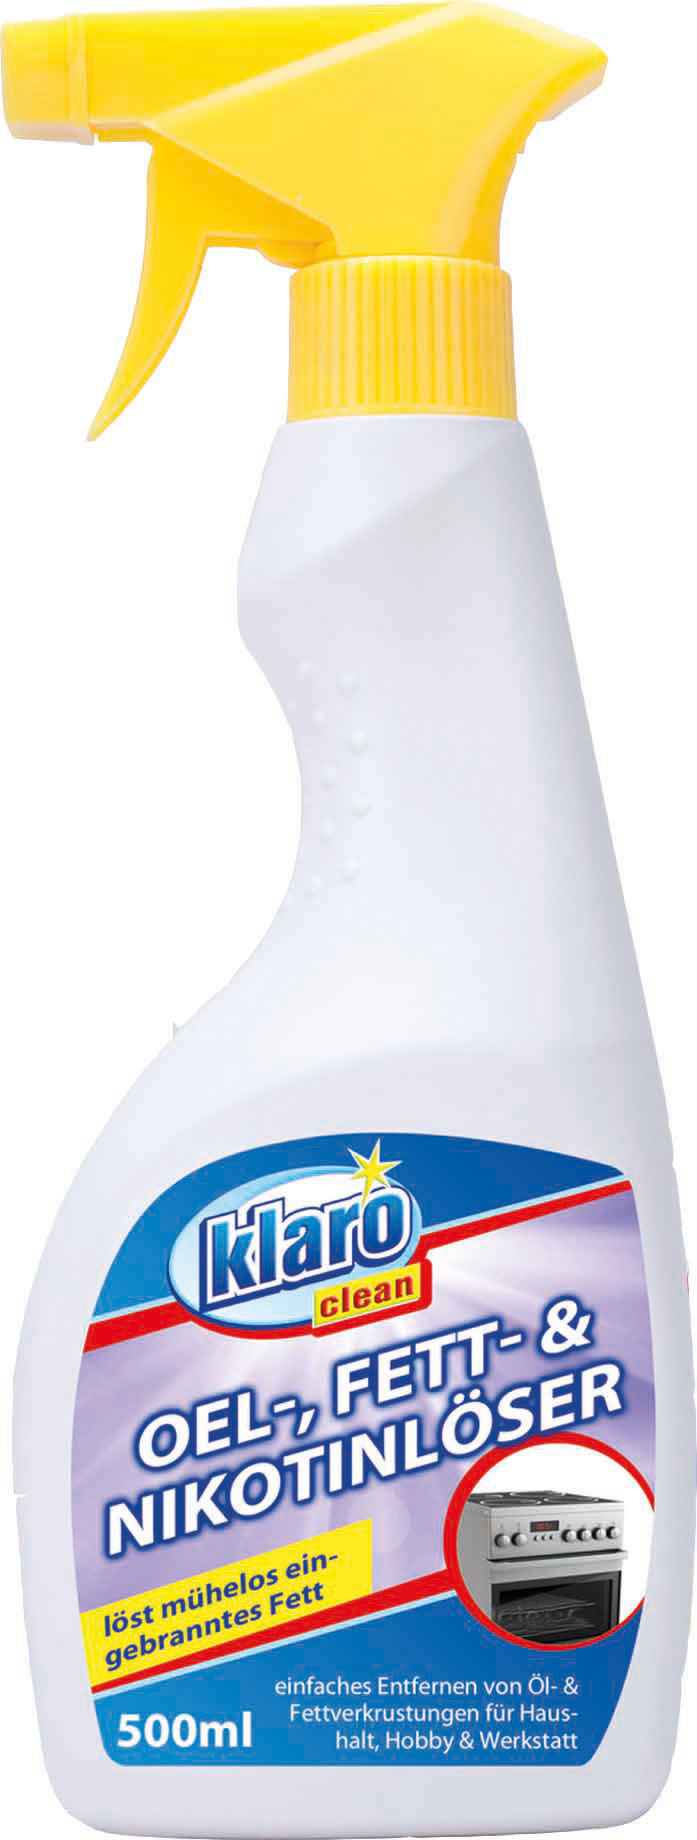 60001 - oil-, fat- and nicotin remover 500 ml